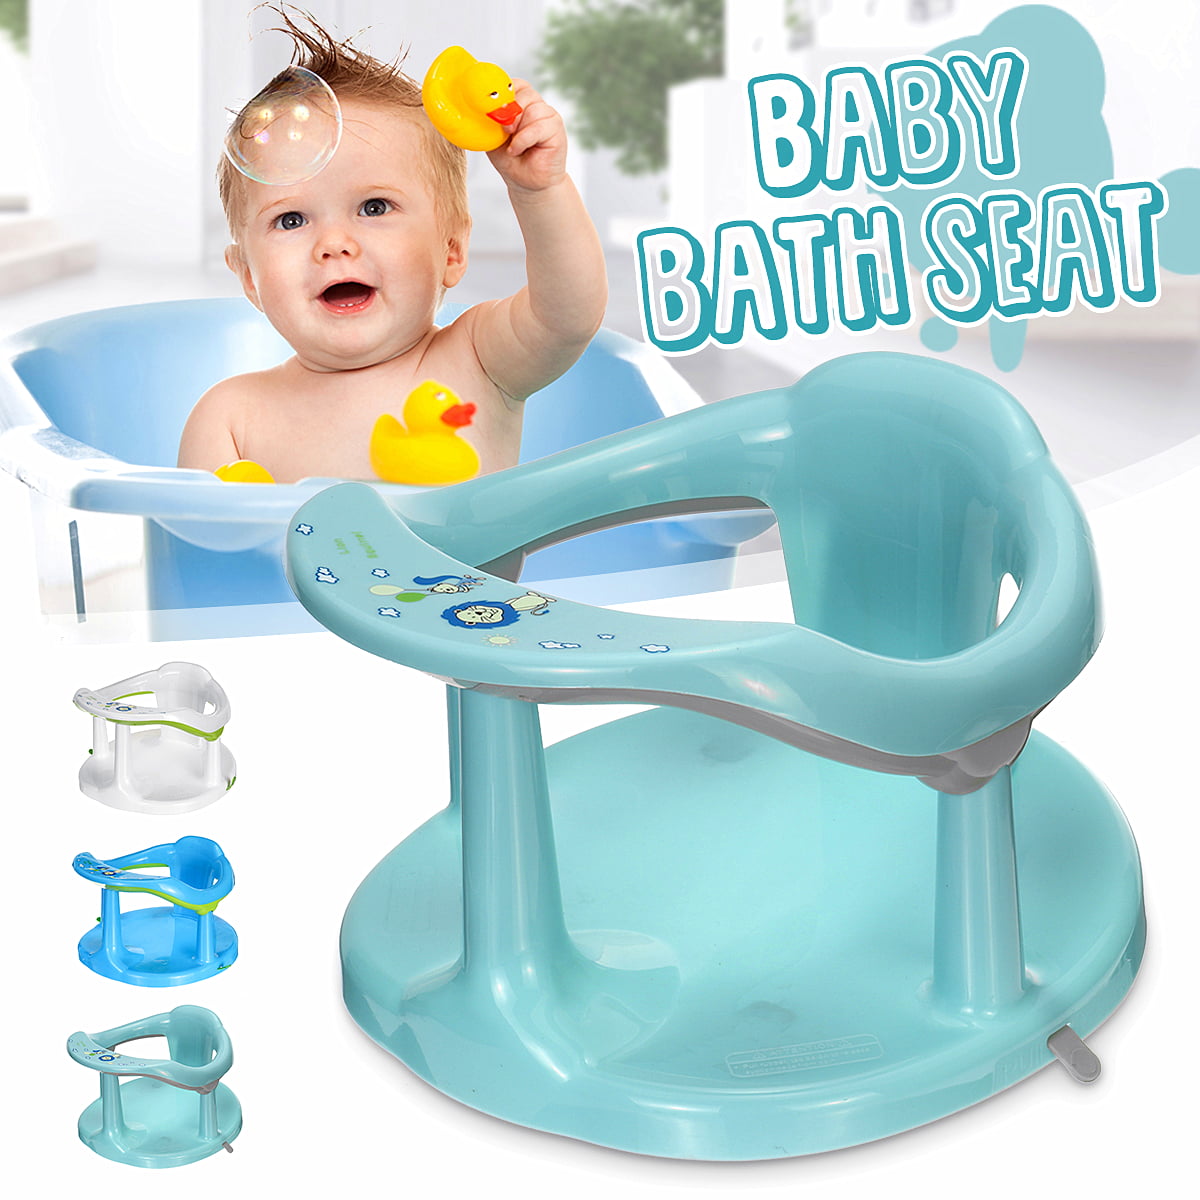 Baby Bath Seat Support Safety Infant Chair Bathing Newborn ...